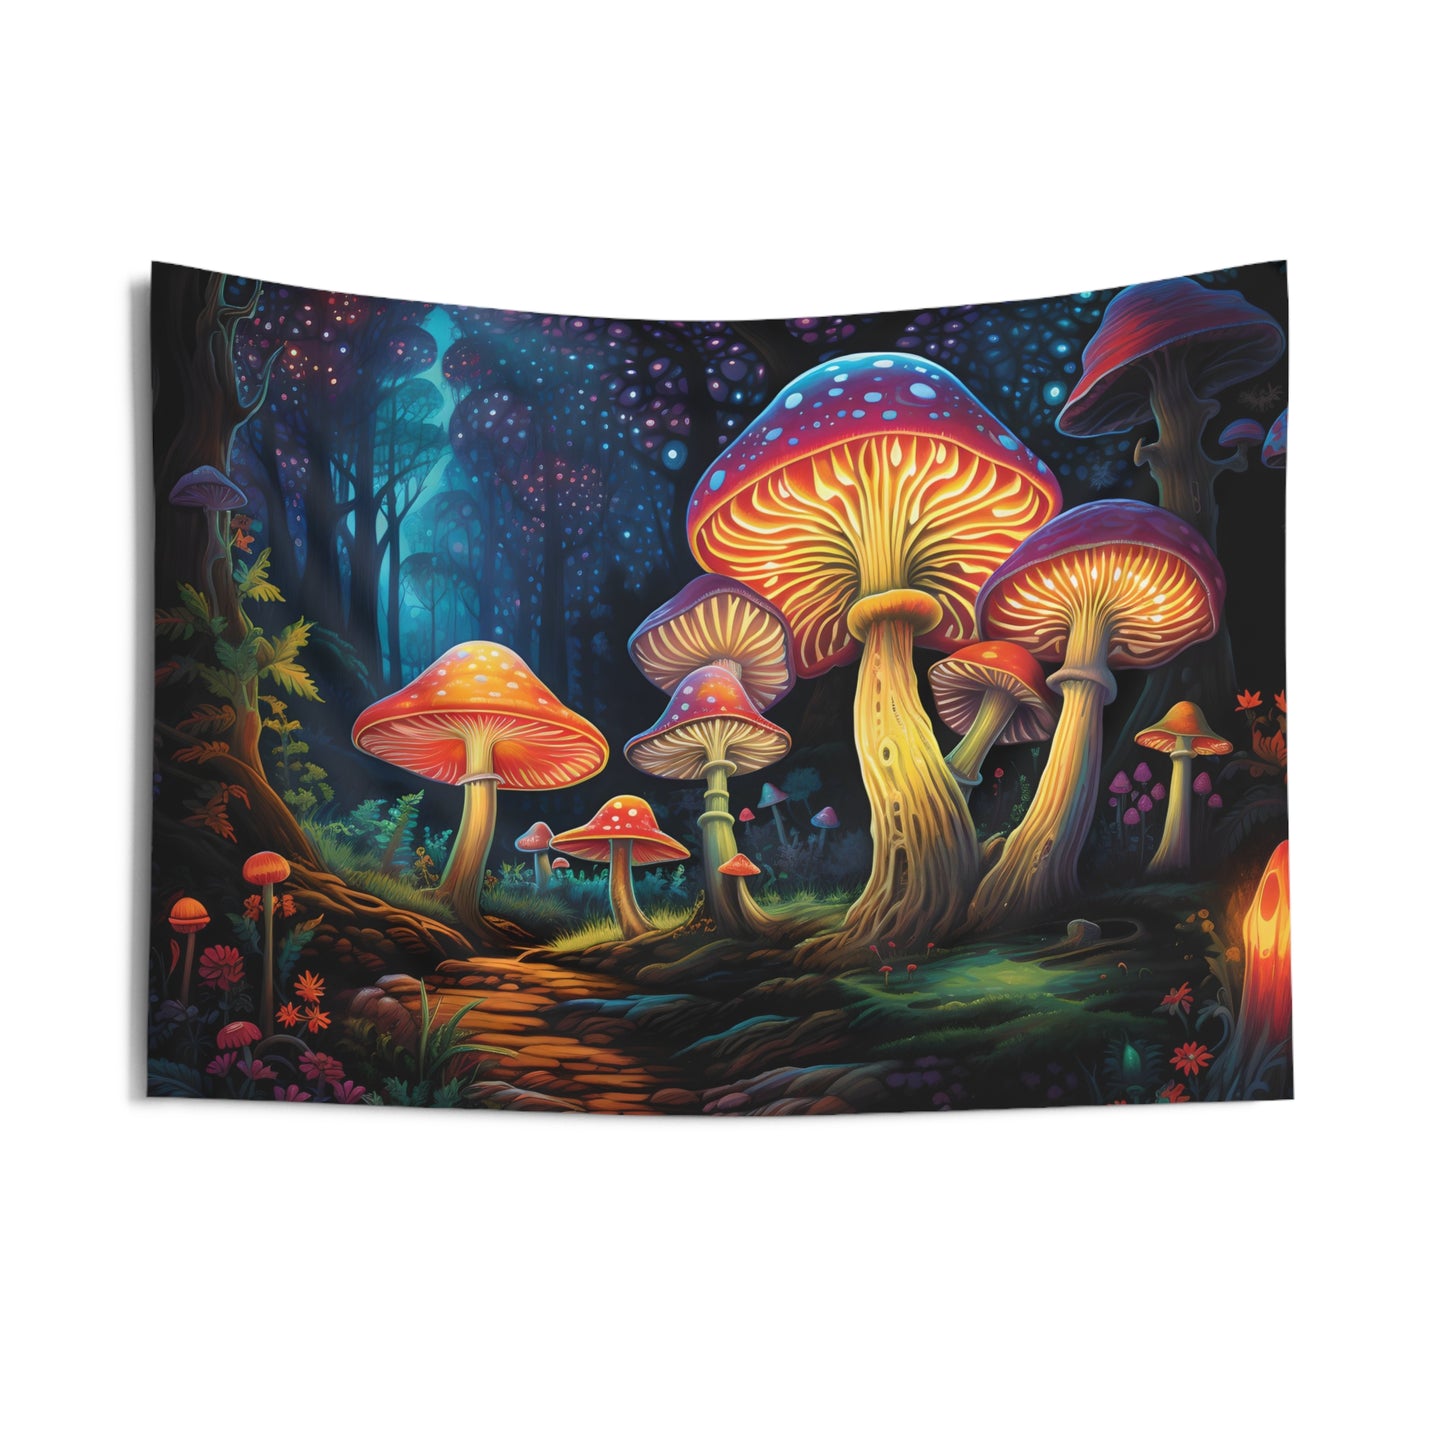 Enchanted Mushroom Forest Tapestry | Witchy & Cottagecore Aesthetic | Perfect for College Dorm, Living Room Decor | Gift Idea